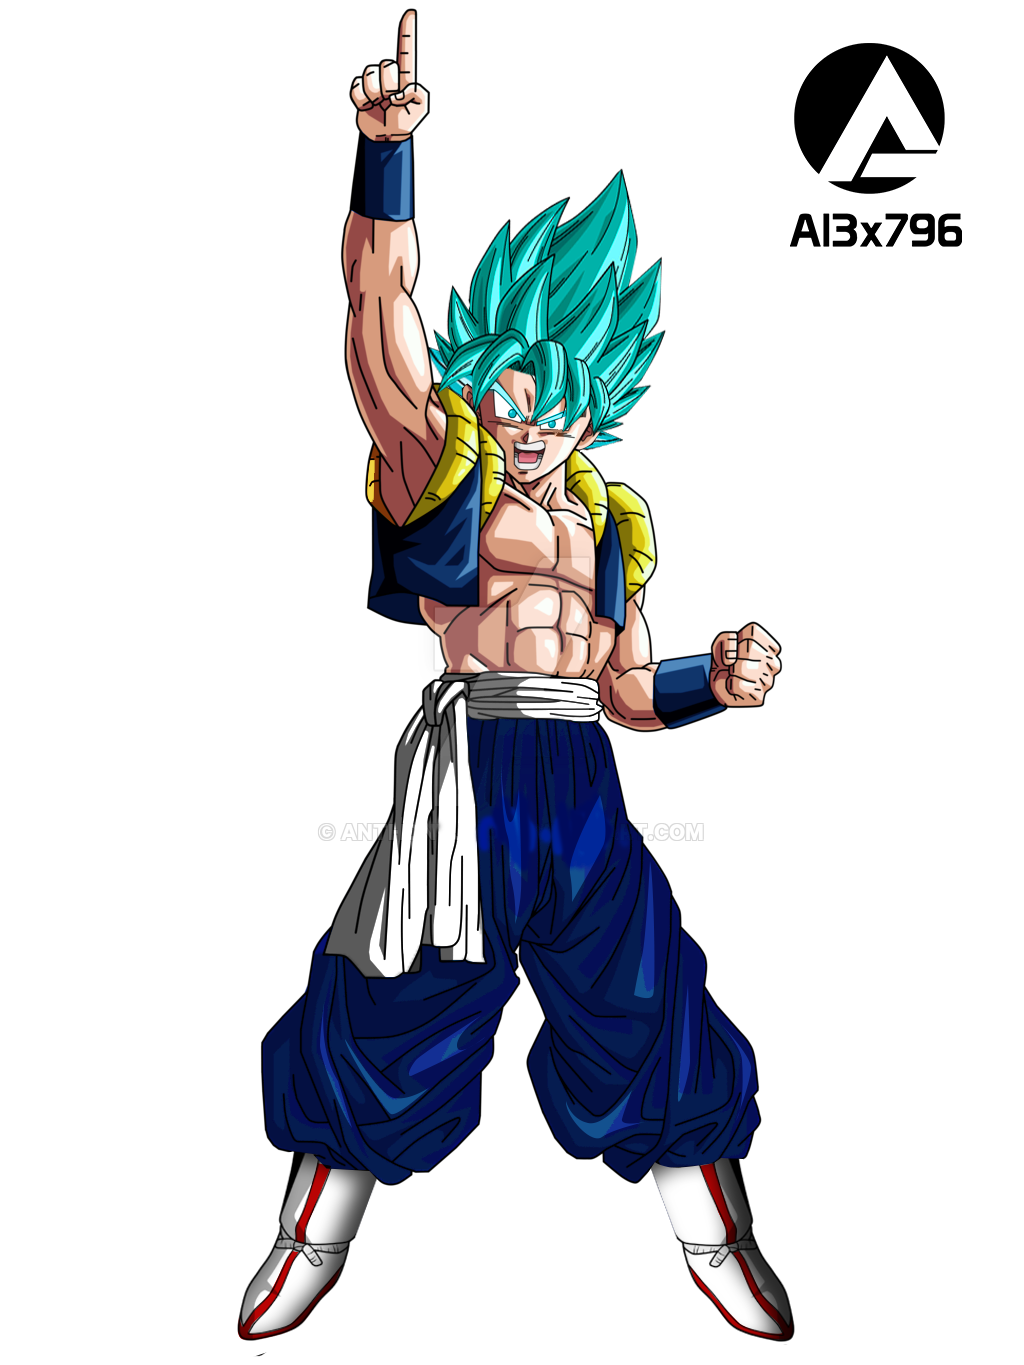 Super Gogeta Animated Picture Codes and Downloads #39968672,328113235